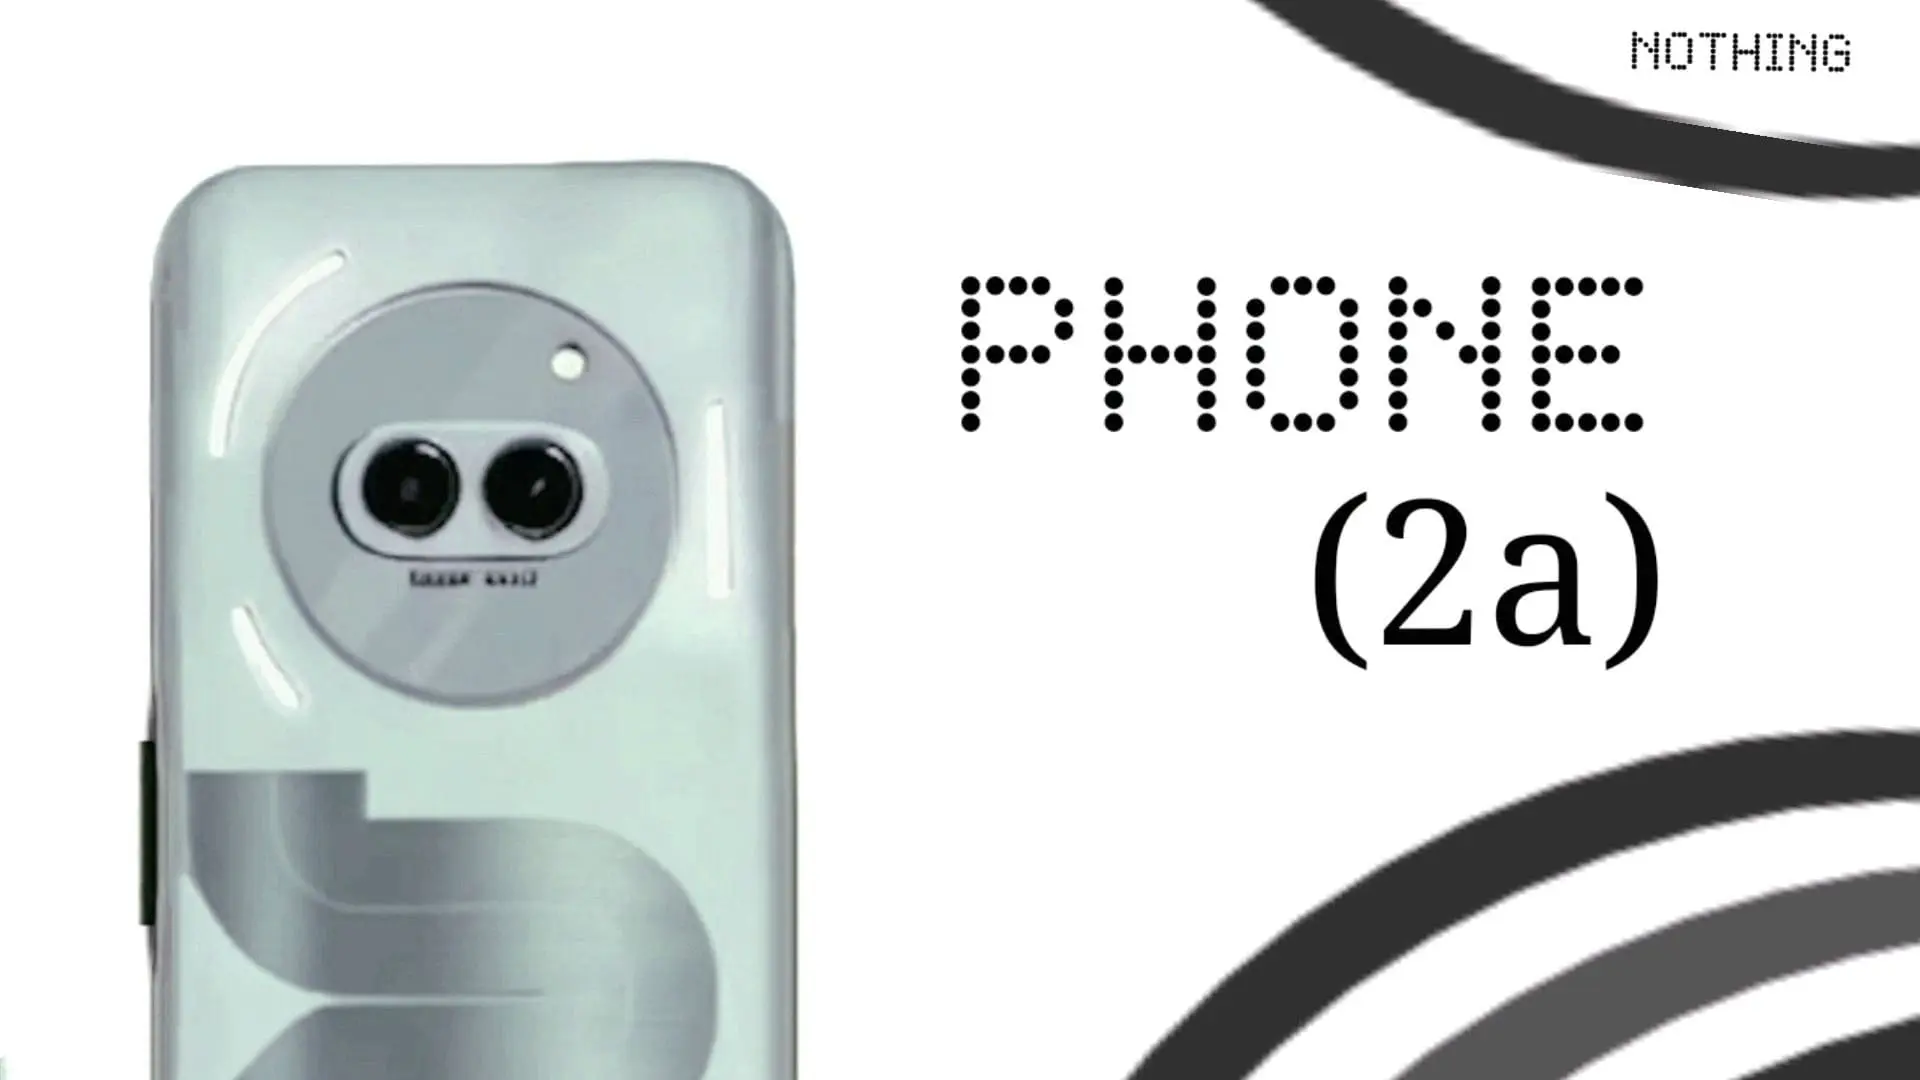 Breaking News The Nothing Phone (2a) Revolution - Price, Design, and Launch Details Unveiled!--